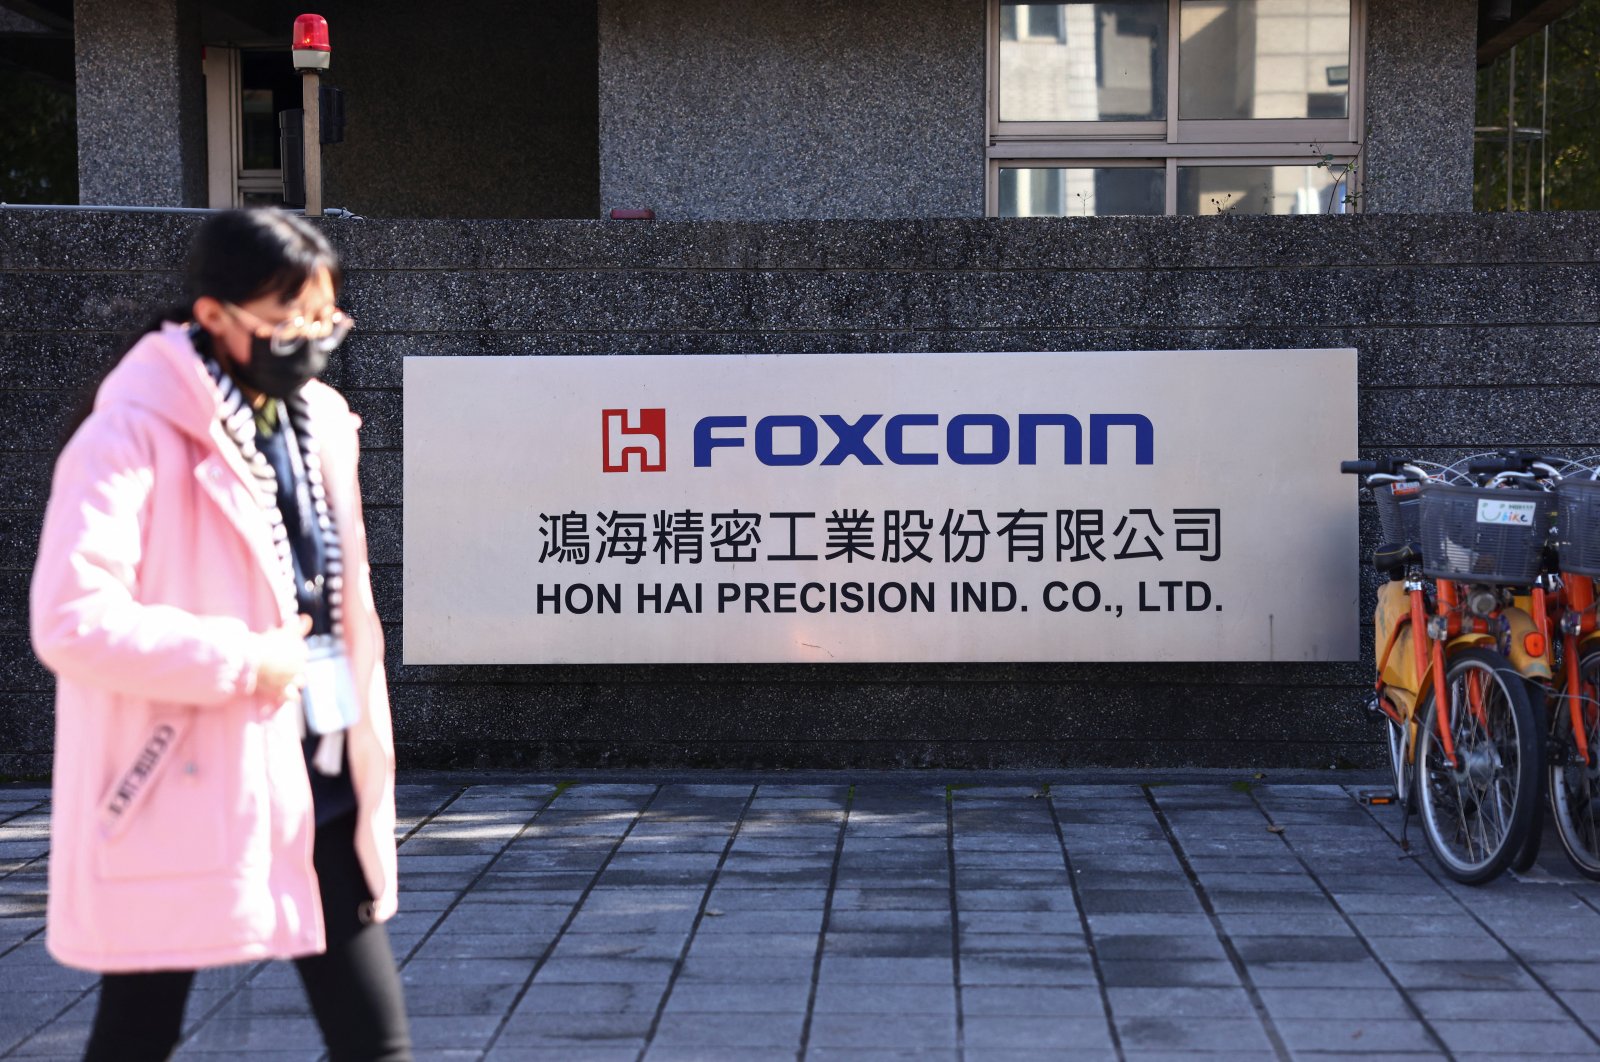 A woman walks past the logo of Foxconn outside a company&#039;s building, in New Taipei City, Taiwan Dec. 22, 2022. (Reuters Photo)